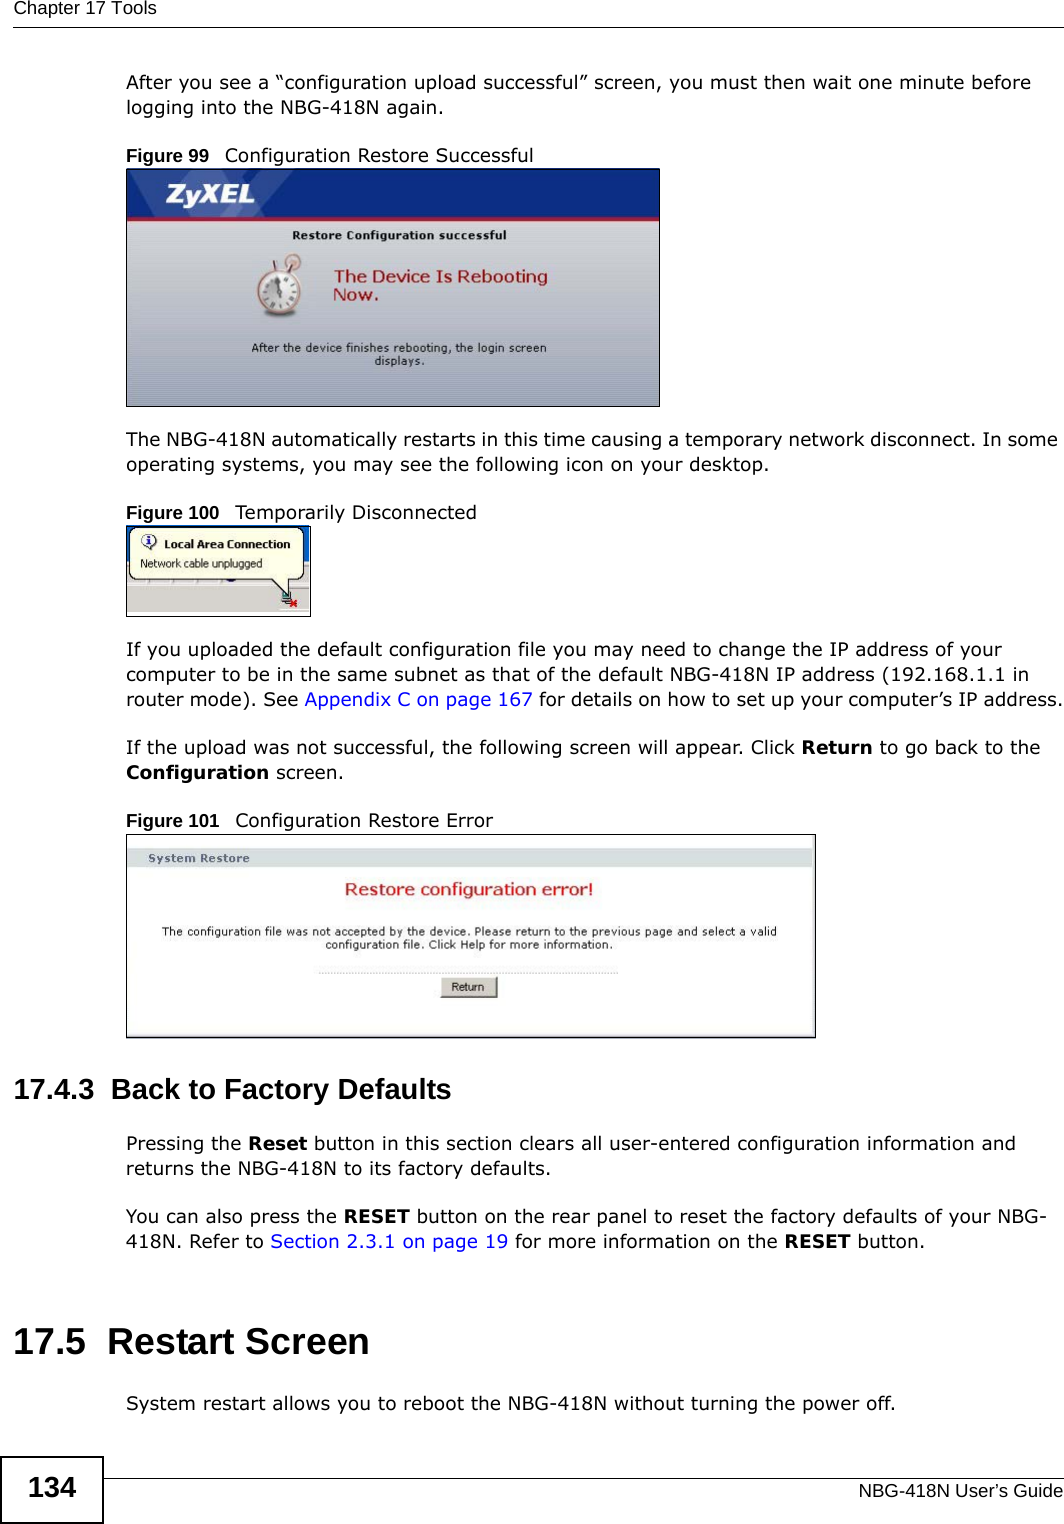 Chapter 17 ToolsNBG-418N User’s Guide134After you see a “configuration upload successful” screen, you must then wait one minute before logging into the NBG-418N again. Figure 99   Configuration Restore SuccessfulThe NBG-418N automatically restarts in this time causing a temporary network disconnect. In some operating systems, you may see the following icon on your desktop.Figure 100   Temporarily DisconnectedIf you uploaded the default configuration file you may need to change the IP address of your computer to be in the same subnet as that of the default NBG-418N IP address (192.168.1.1 in router mode). See Appendix C on page 167 for details on how to set up your computer’s IP address.If the upload was not successful, the following screen will appear. Click Return to go back to the Configuration screen.Figure 101   Configuration Restore Error17.4.3  Back to Factory DefaultsPressing the Reset button in this section clears all user-entered configuration information and returns the NBG-418N to its factory defaults.You can also press the RESET button on the rear panel to reset the factory defaults of your NBG-418N. Refer to Section 2.3.1 on page 19 for more information on the RESET button.17.5  Restart ScreenSystem restart allows you to reboot the NBG-418N without turning the power off. 